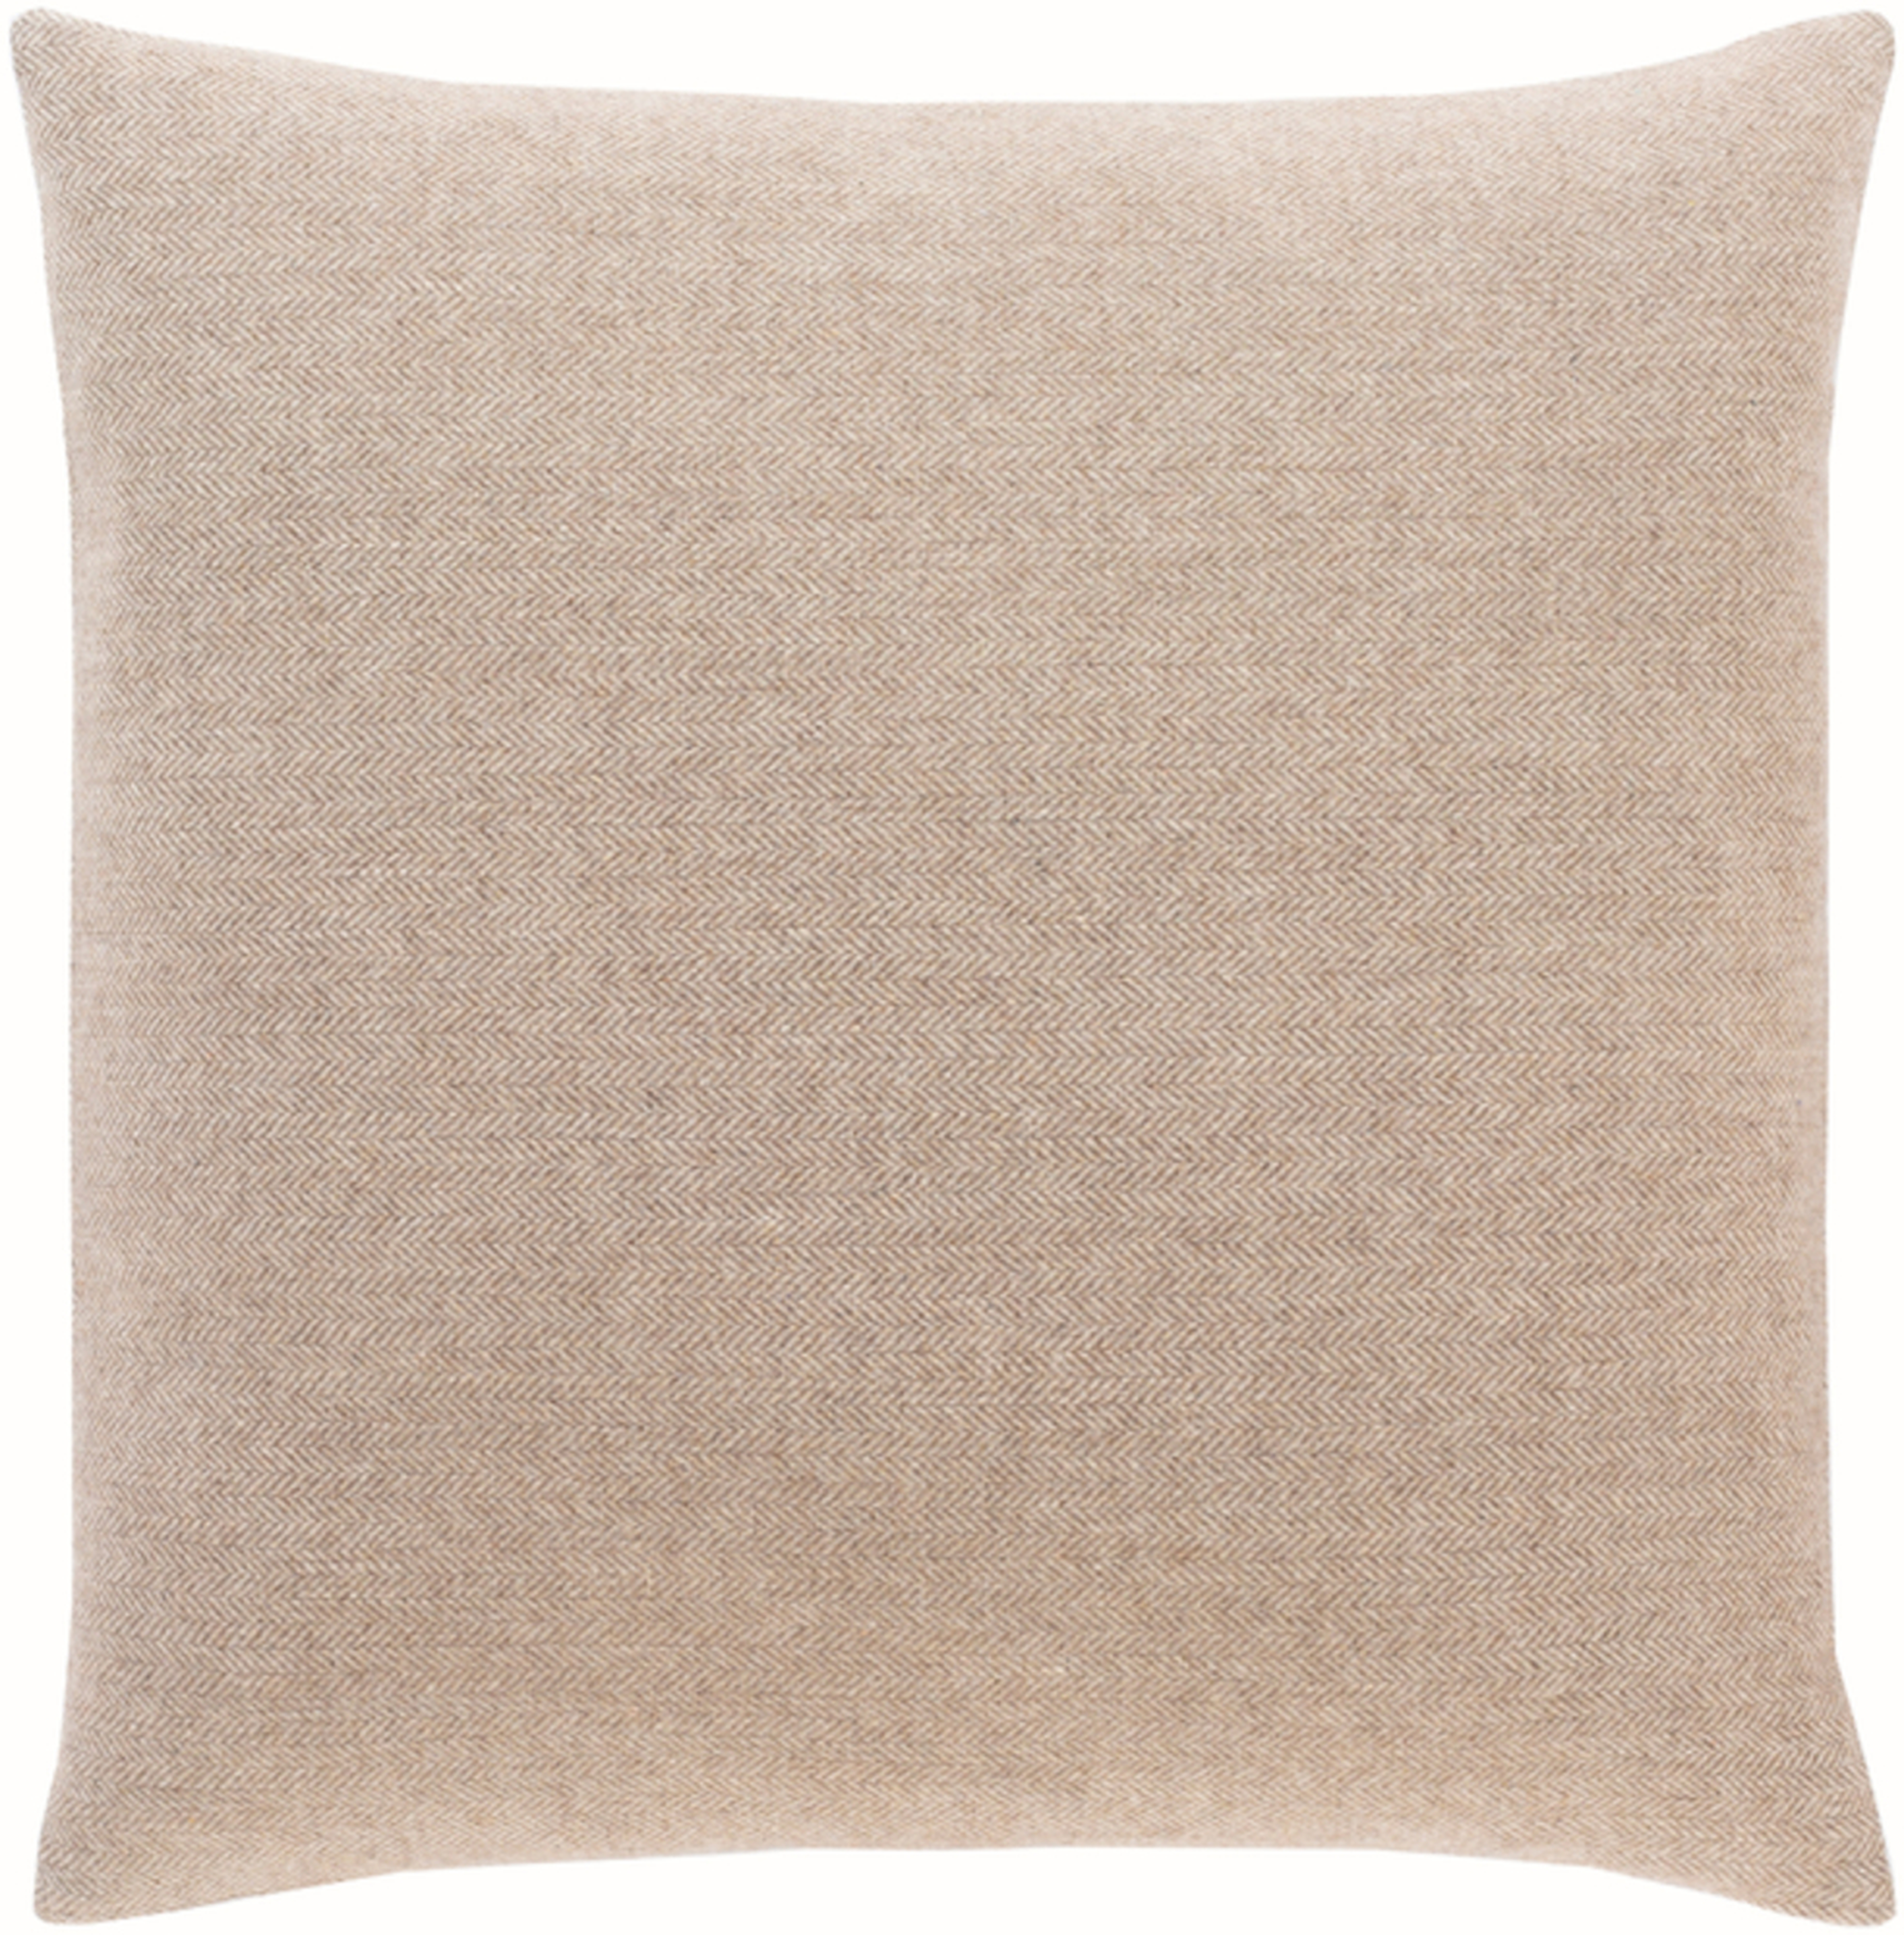 Wells Pillow, 20" x 20", Taupe - Cove Goods